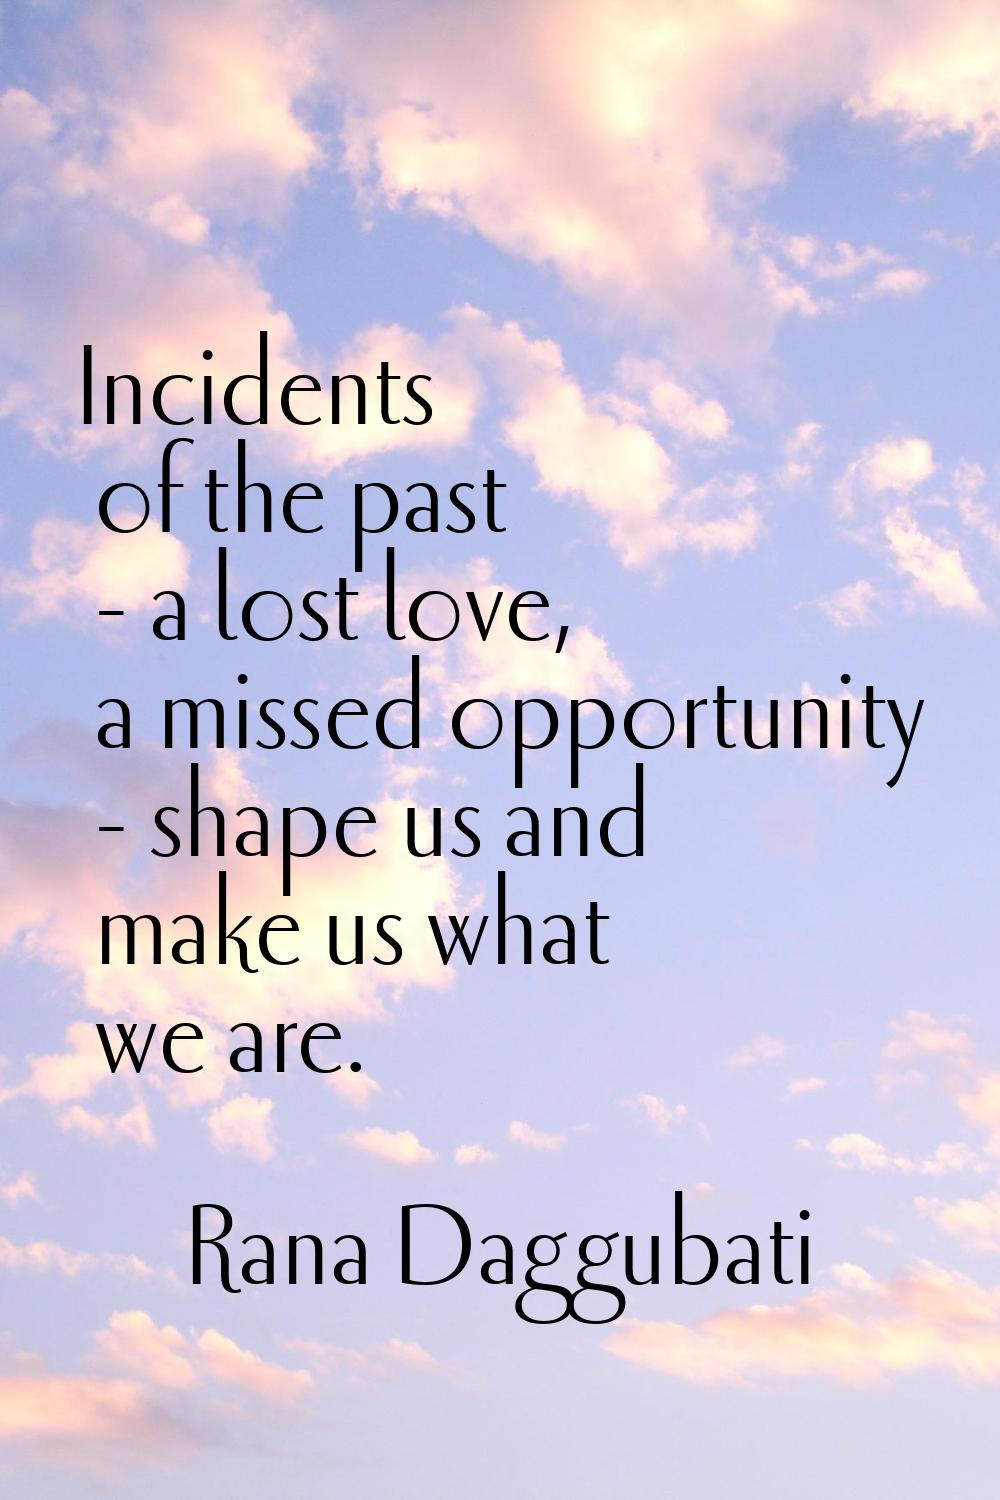 Incidents of the past - a lost love, a missed opportunity - shape us and make us what we are.